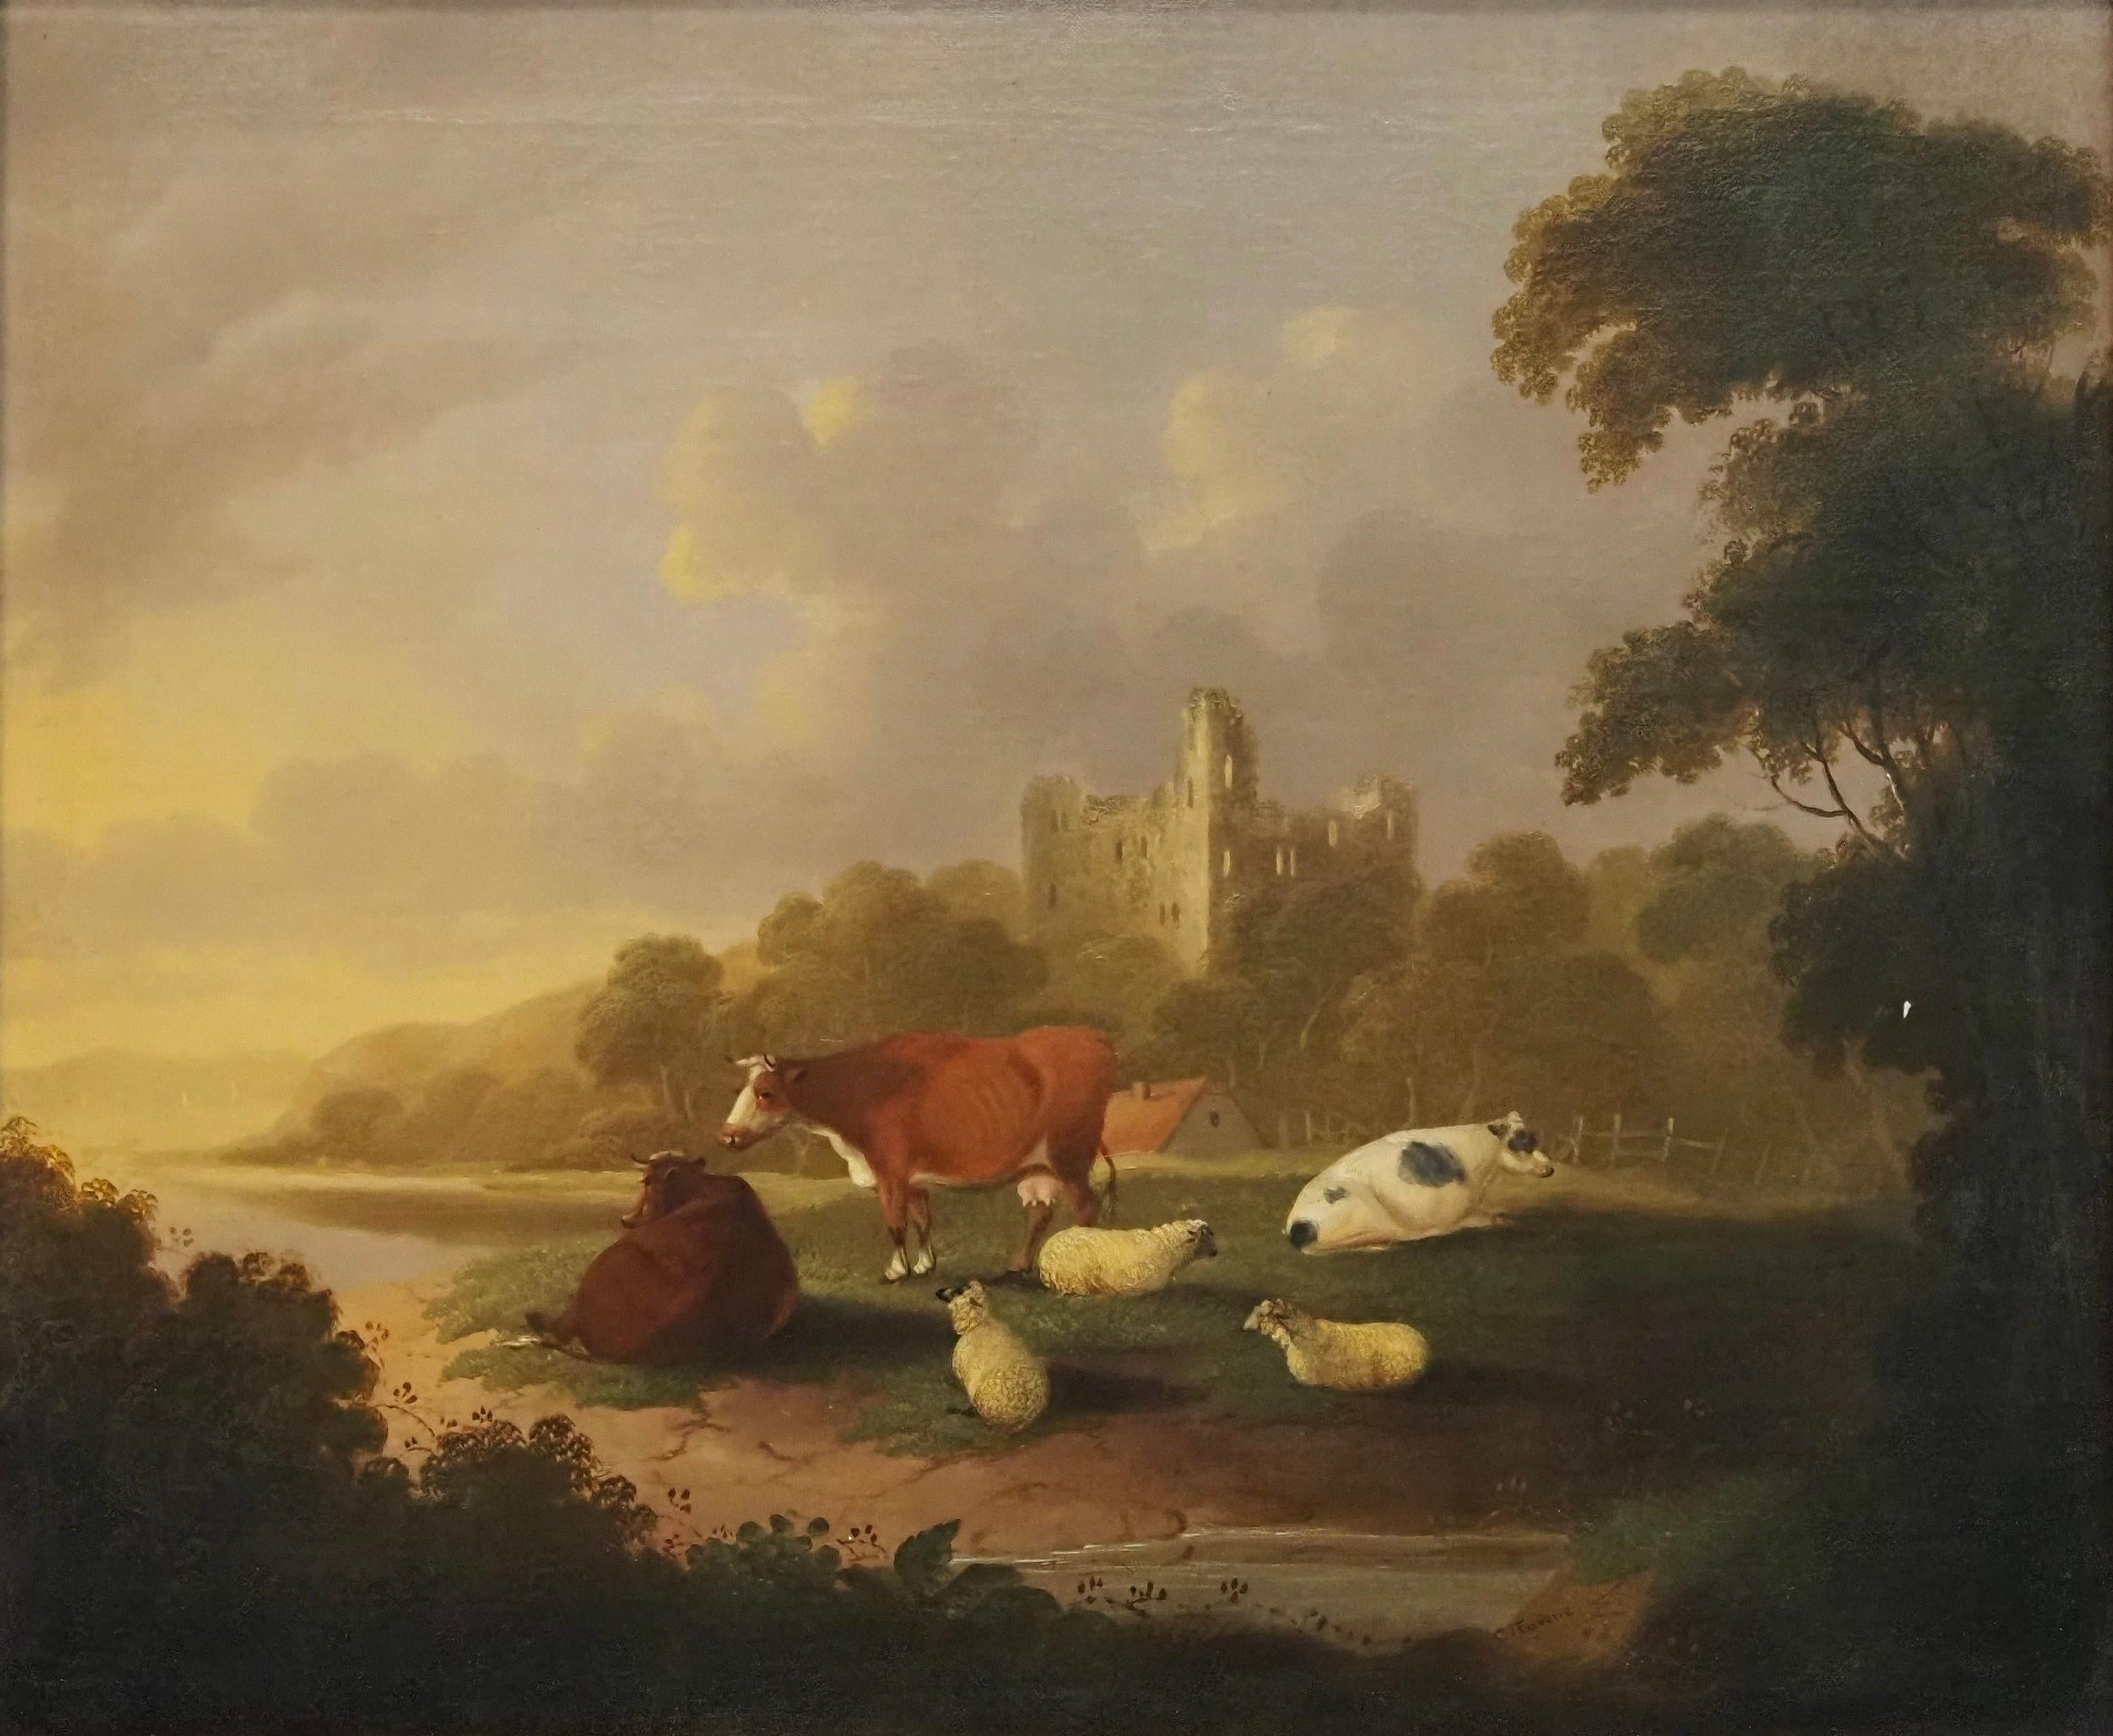 A pair of Landscapes, - A river landscape, with cattle and sheep resting - Painting by Charles Towne